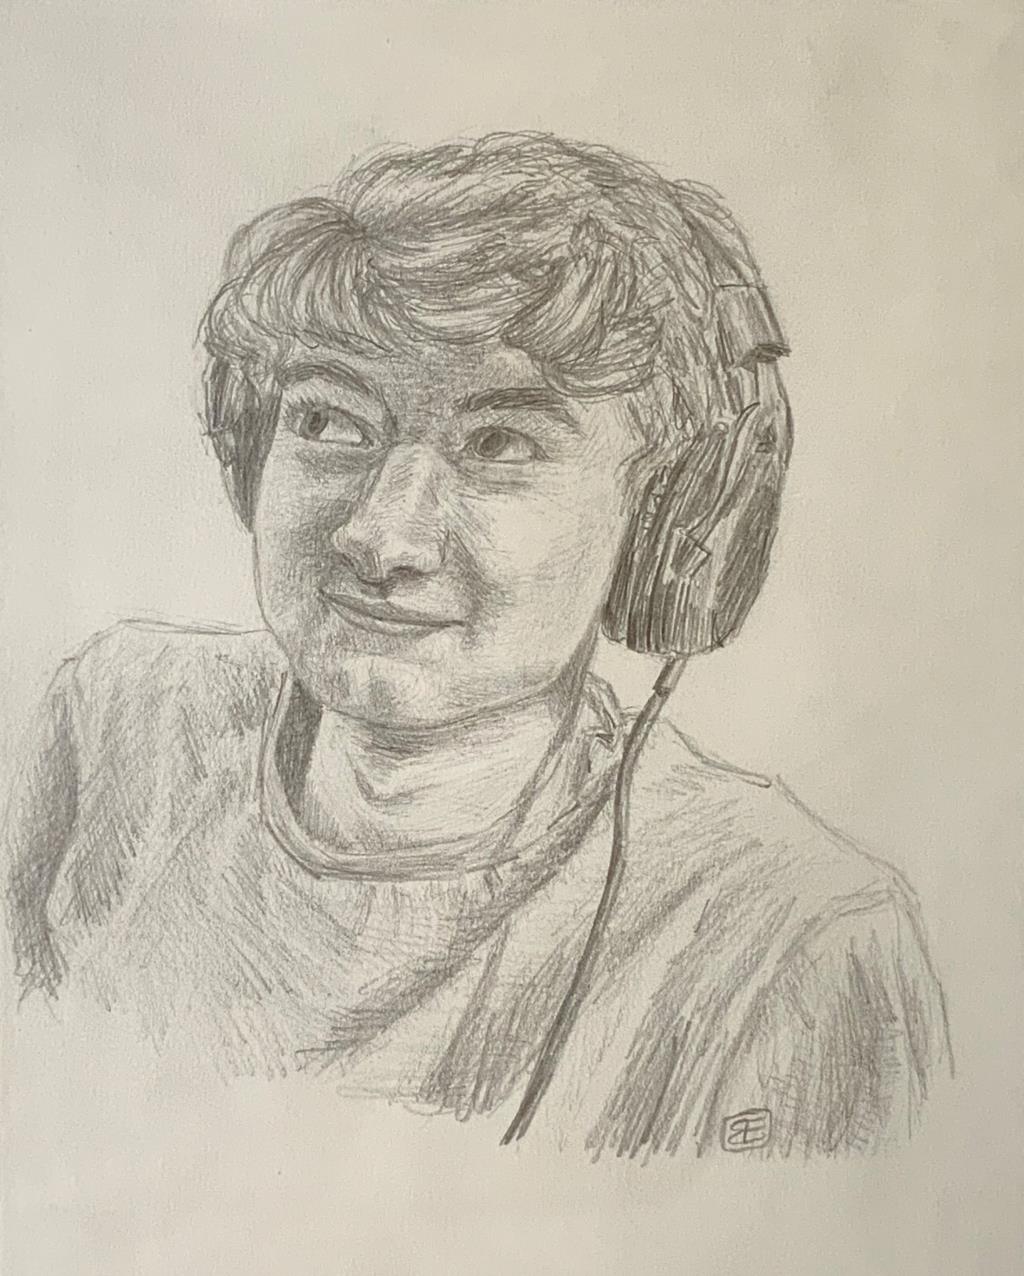 (age 15) "Eleanor found comfort during the pandemic through art and youtube, expressing herself often through portrait drawings of some of her favorite youtubers. This drawing is of the popular content created by the online name of 'TommyInnit'."